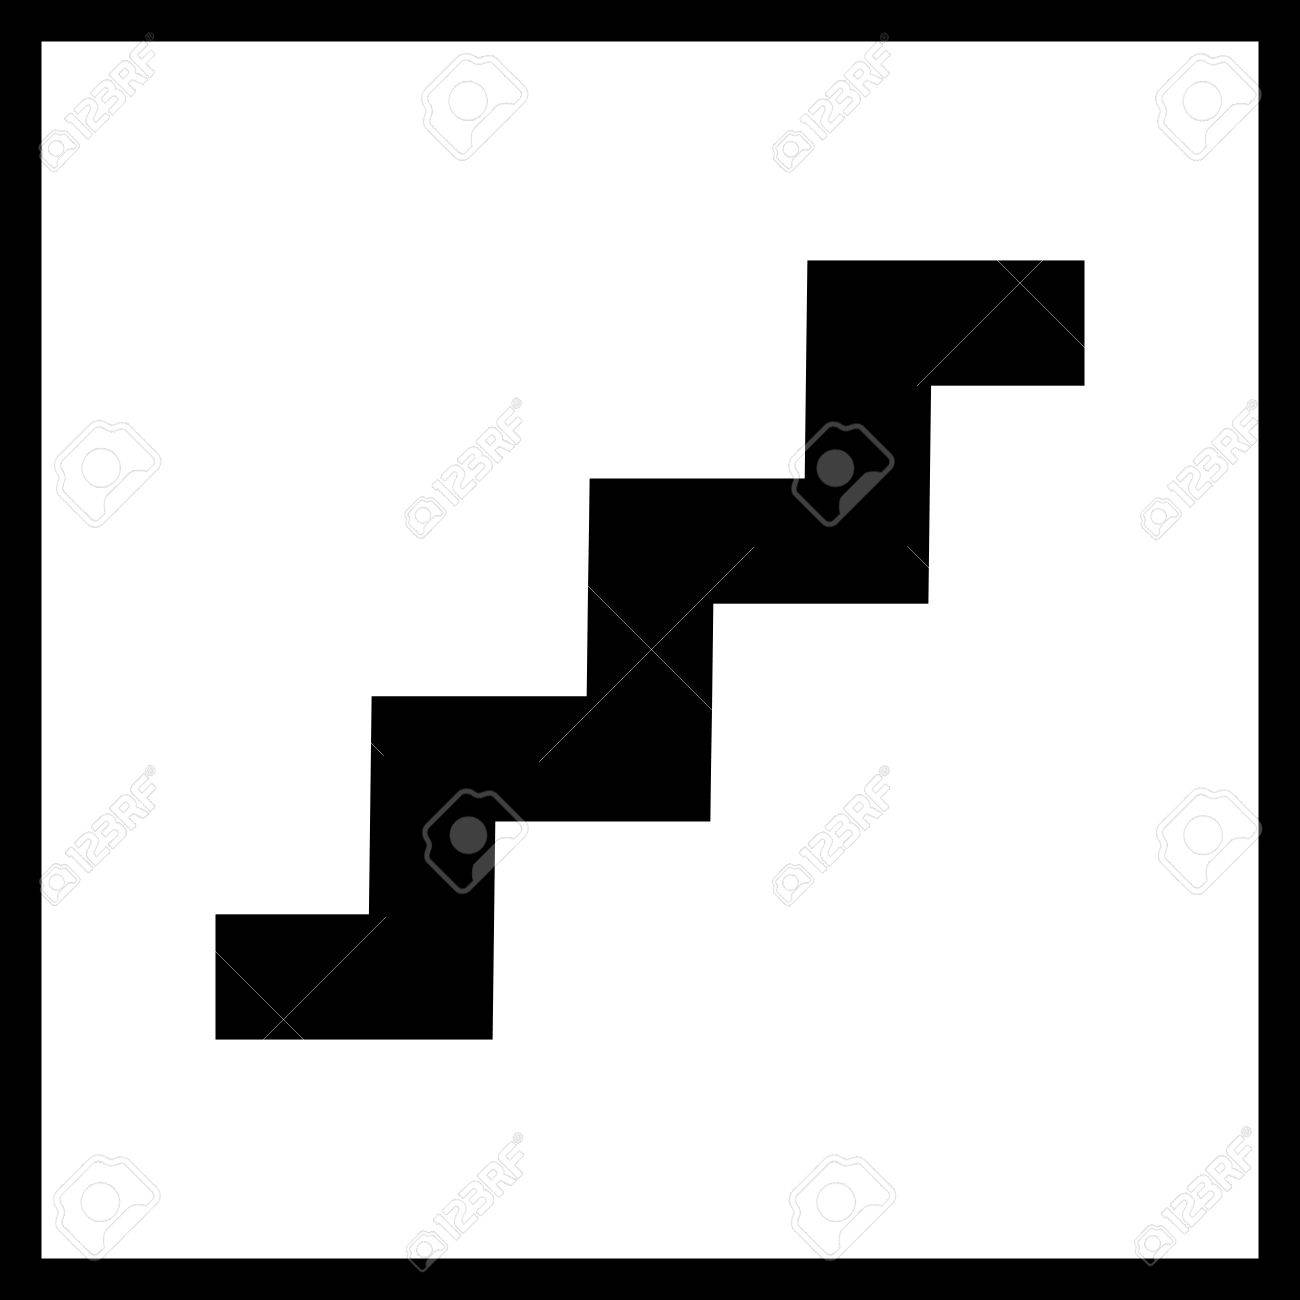 Walk Up Stairs Symbol  Stock Vector  PPVector #141321142